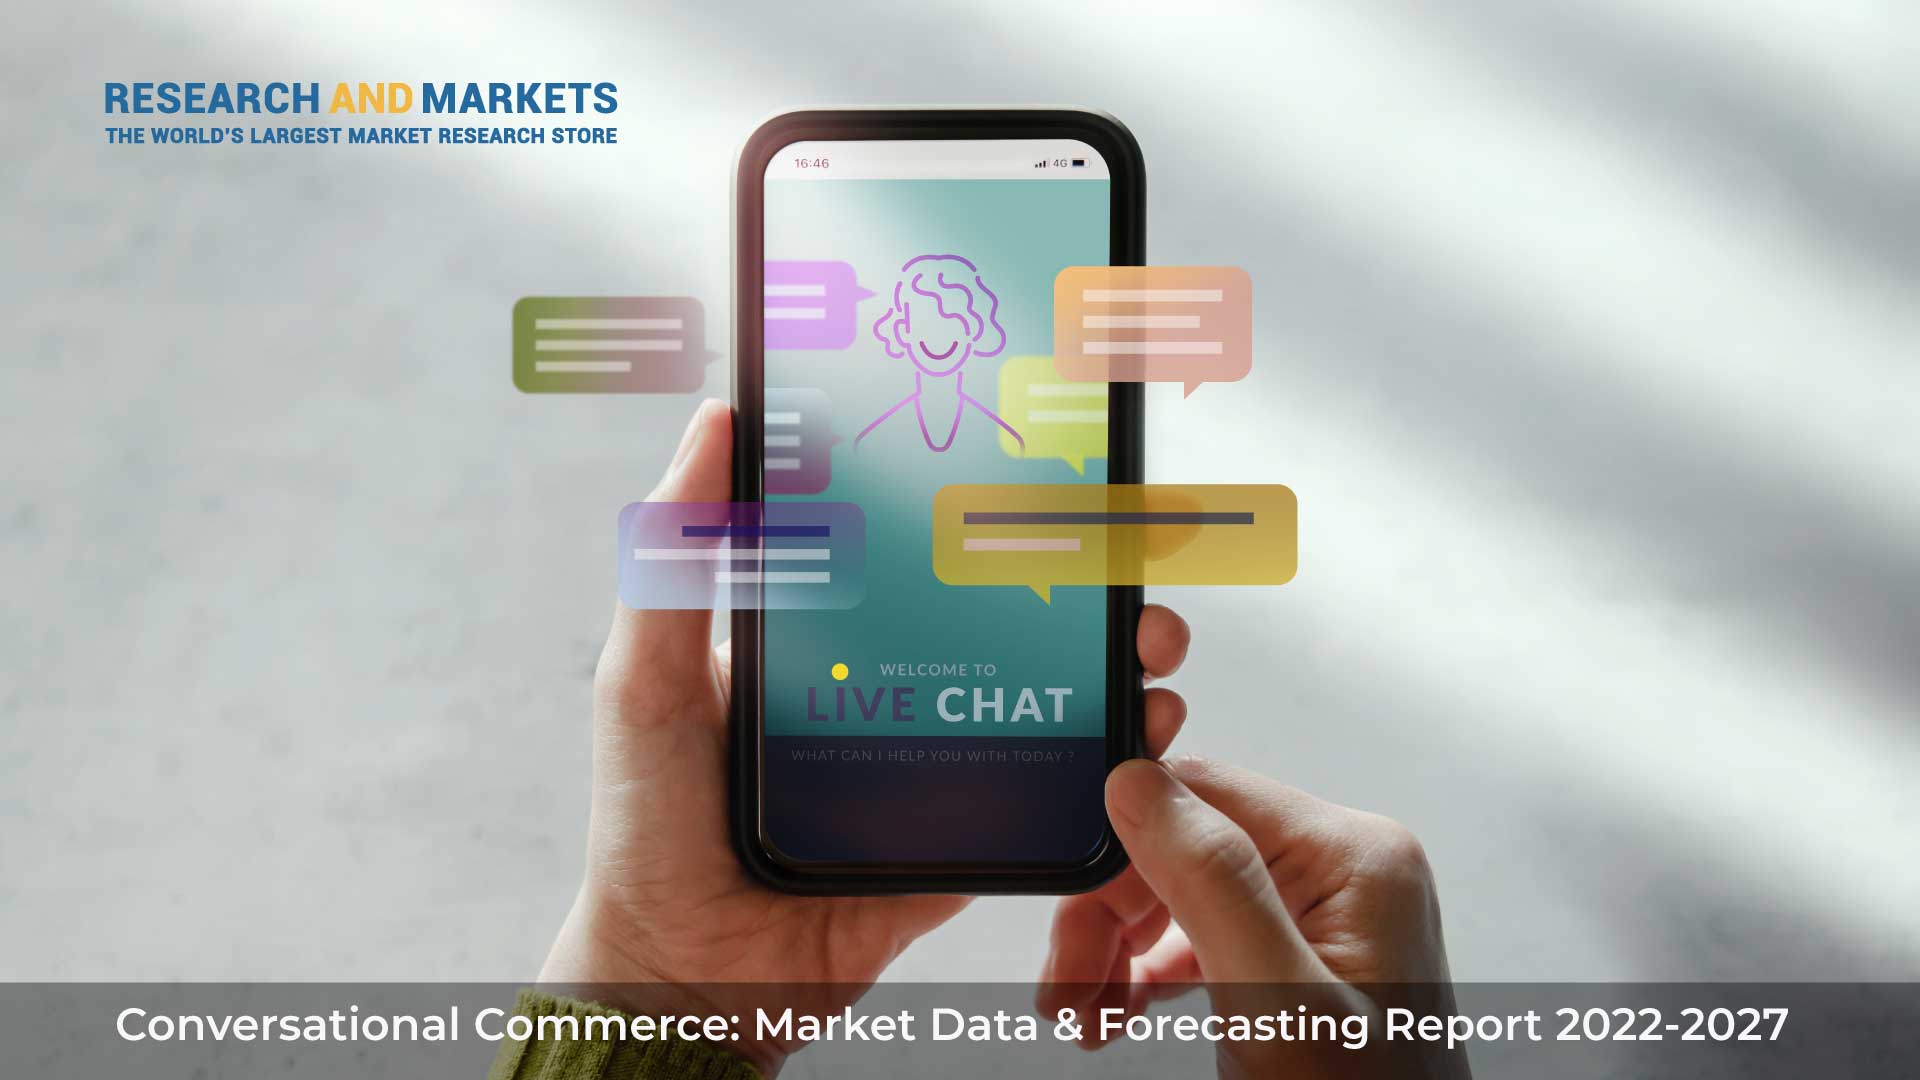 Global Conversational Commerce Market Data & Forecasting Report 2022-2027: Focus on Chatbots, OTT Messaging, RCS Messaging and Voice Assistants Services